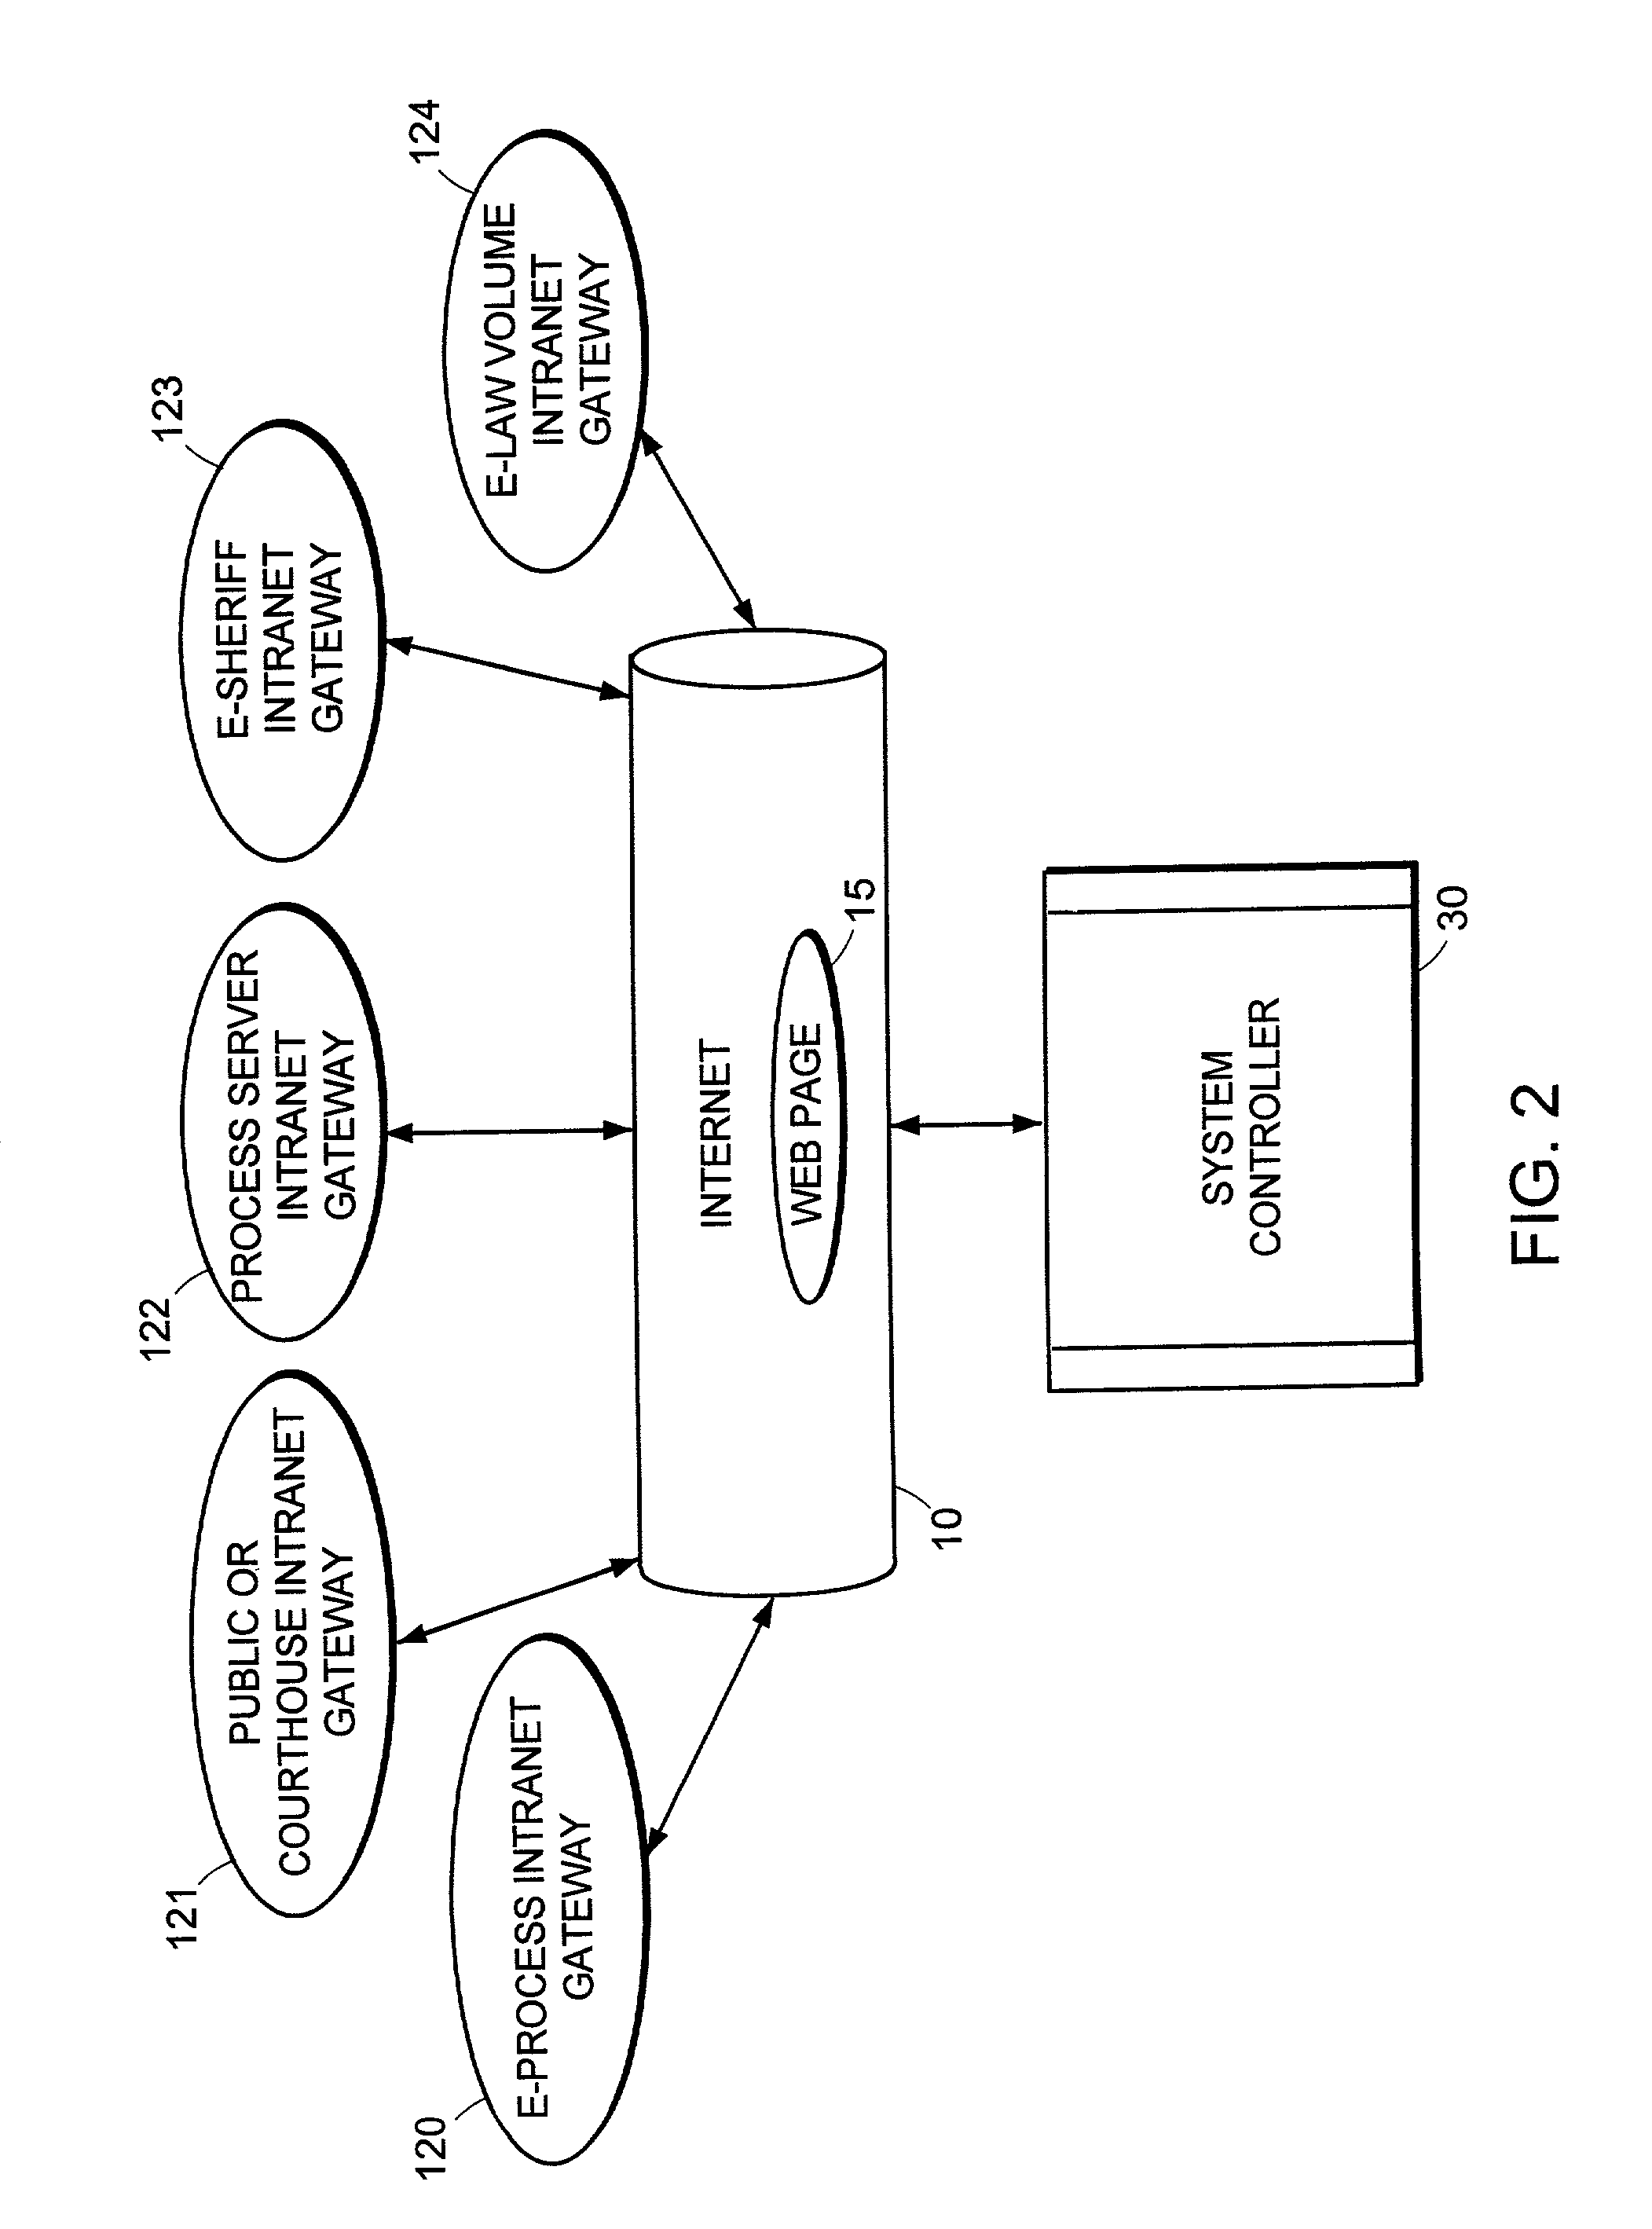 System and method for online creation and integration of service of process functions